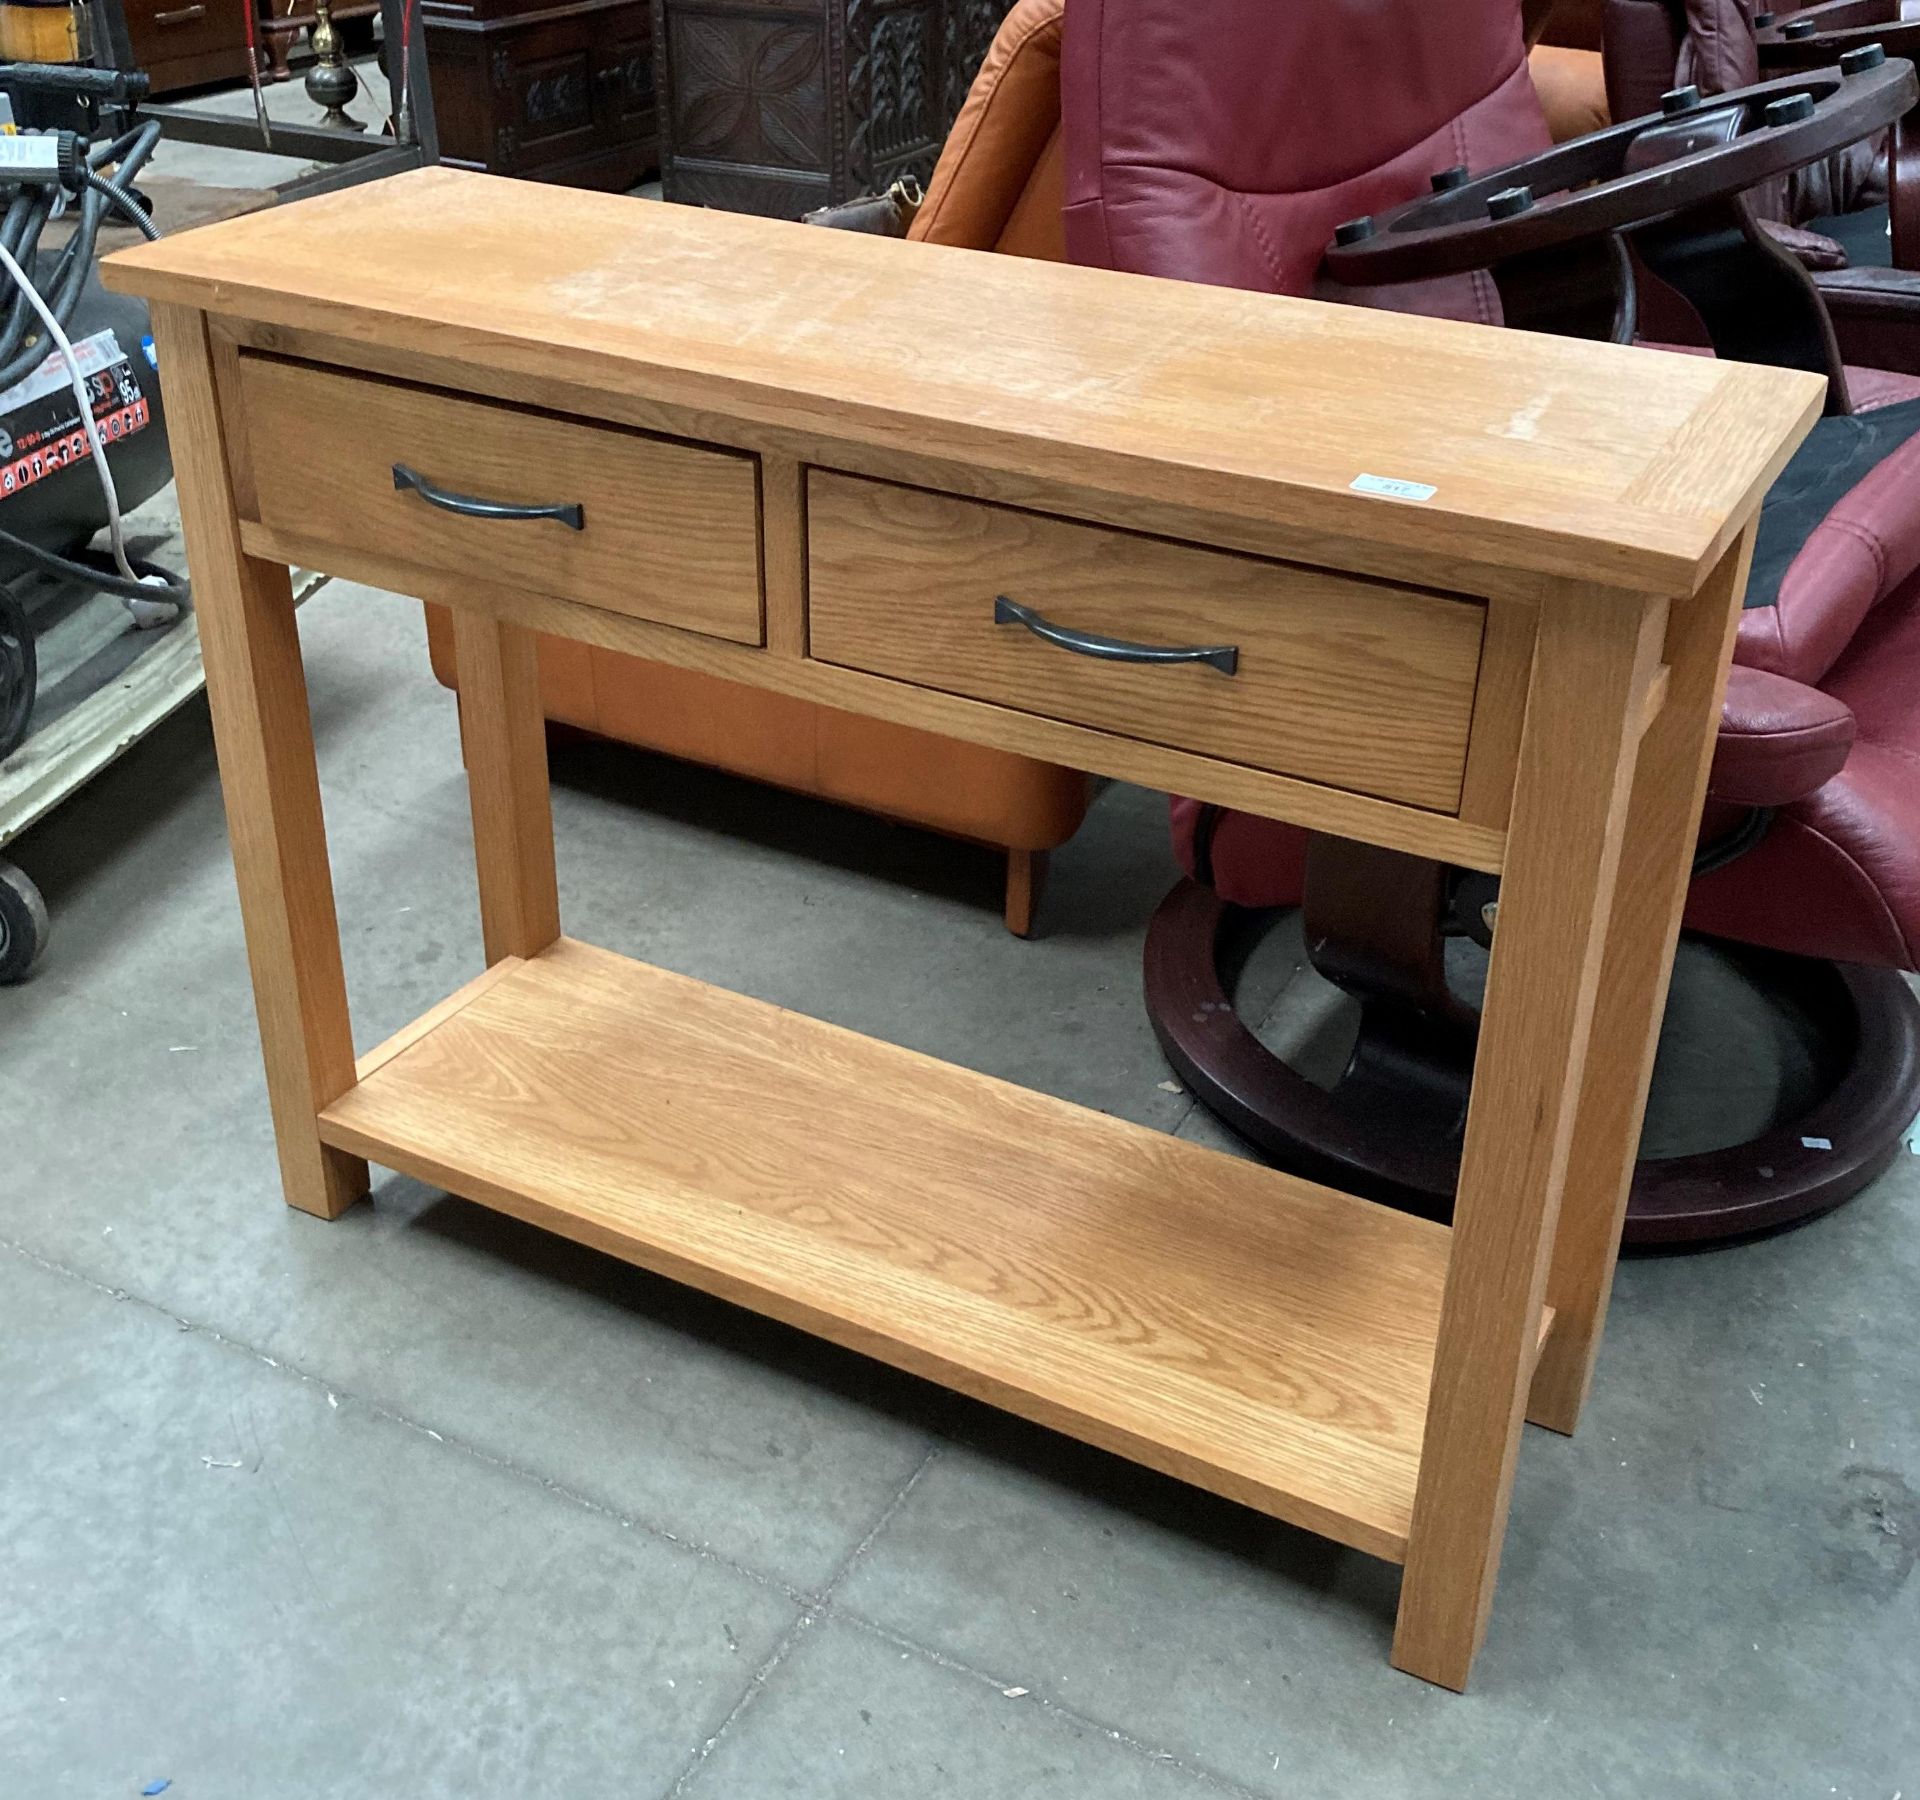 Light oak two drawer side table with under tray,